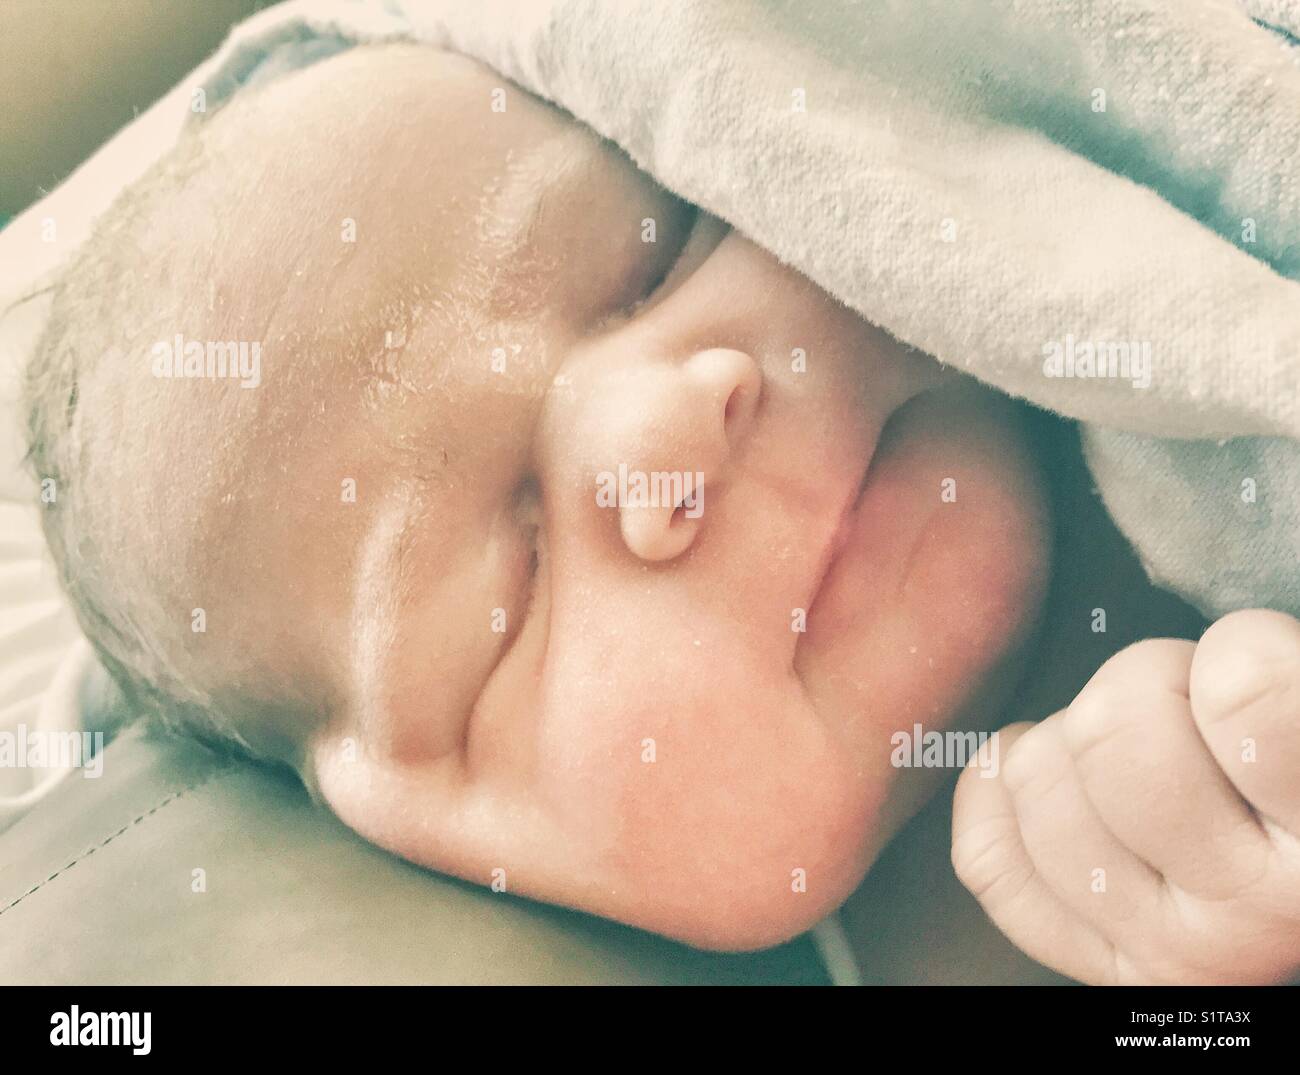 Newborn baby after birth in hospital Stock Photo